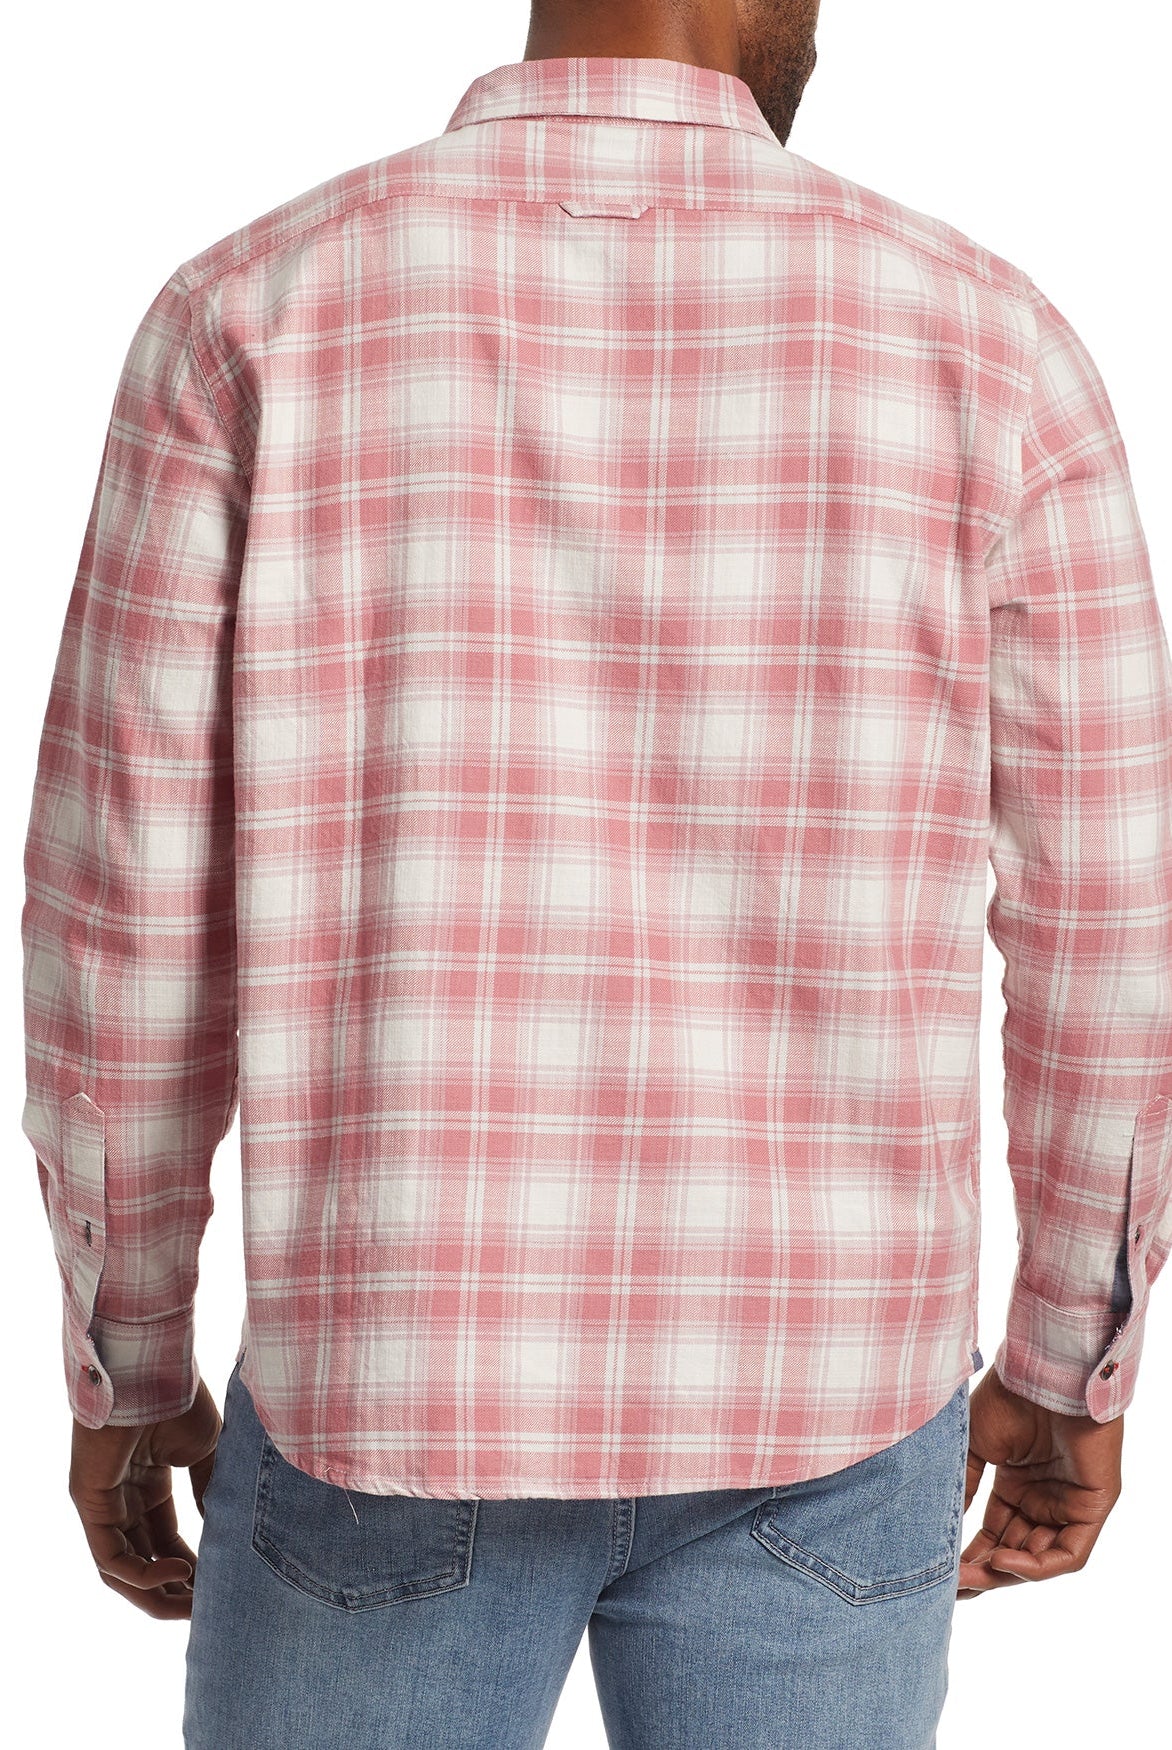 Winstead Single Layer Shirt-Men's Tops-Vixen Collection, Day Spa and Women's Boutique Located in Seattle, Washington